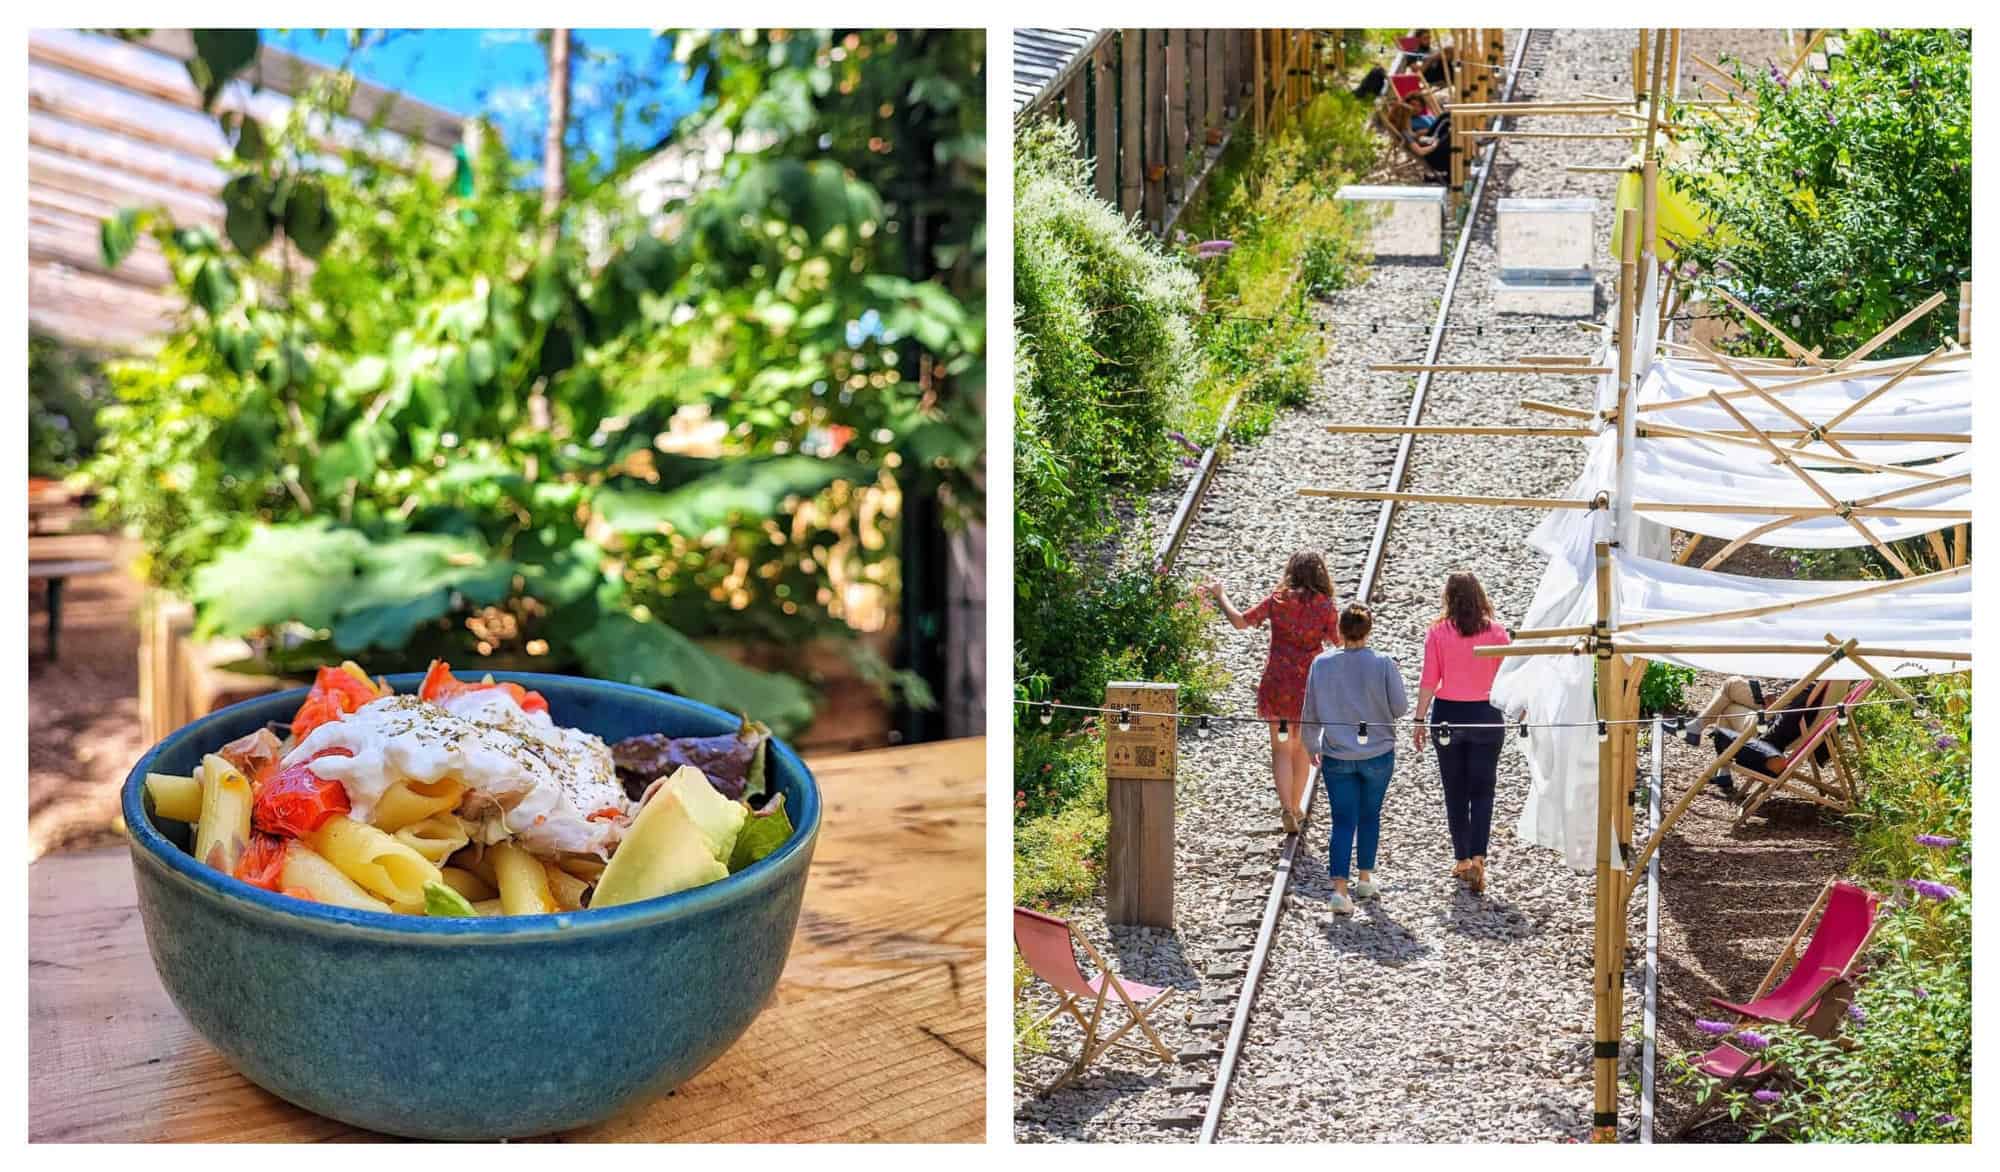 Left: A pasta bowl with white dressing and red bell peppers in a blue green bowl sits in a wooden table. Right: Three women are walking along the rails of an old train line filled with white tents and green shrubs.